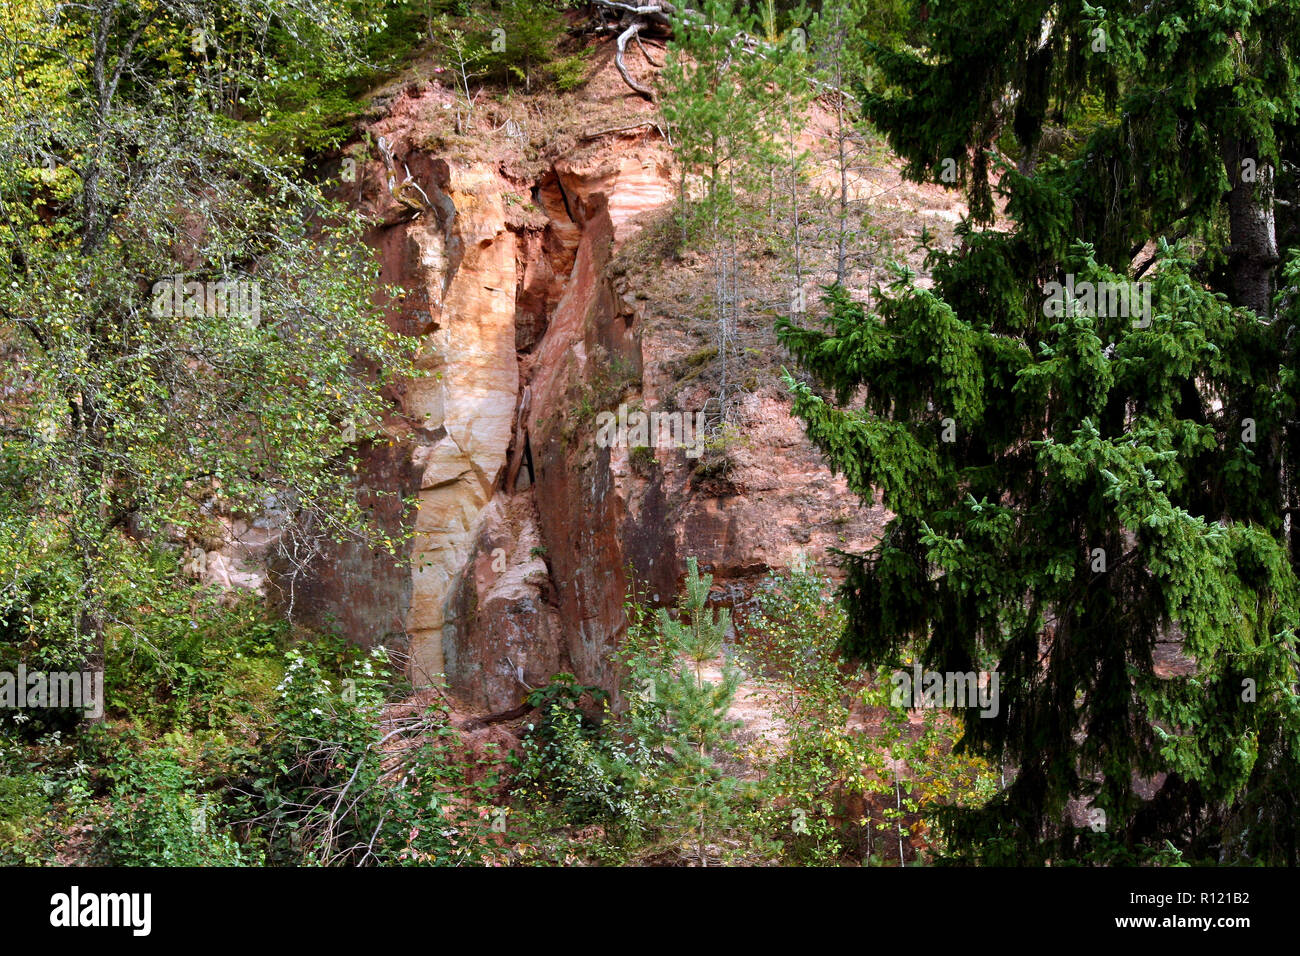 piece of rock red, yellow, brown, white shades, large cliff surrounded by green and yellowing vegetation in autumn, foreground on the left side Stock Photo